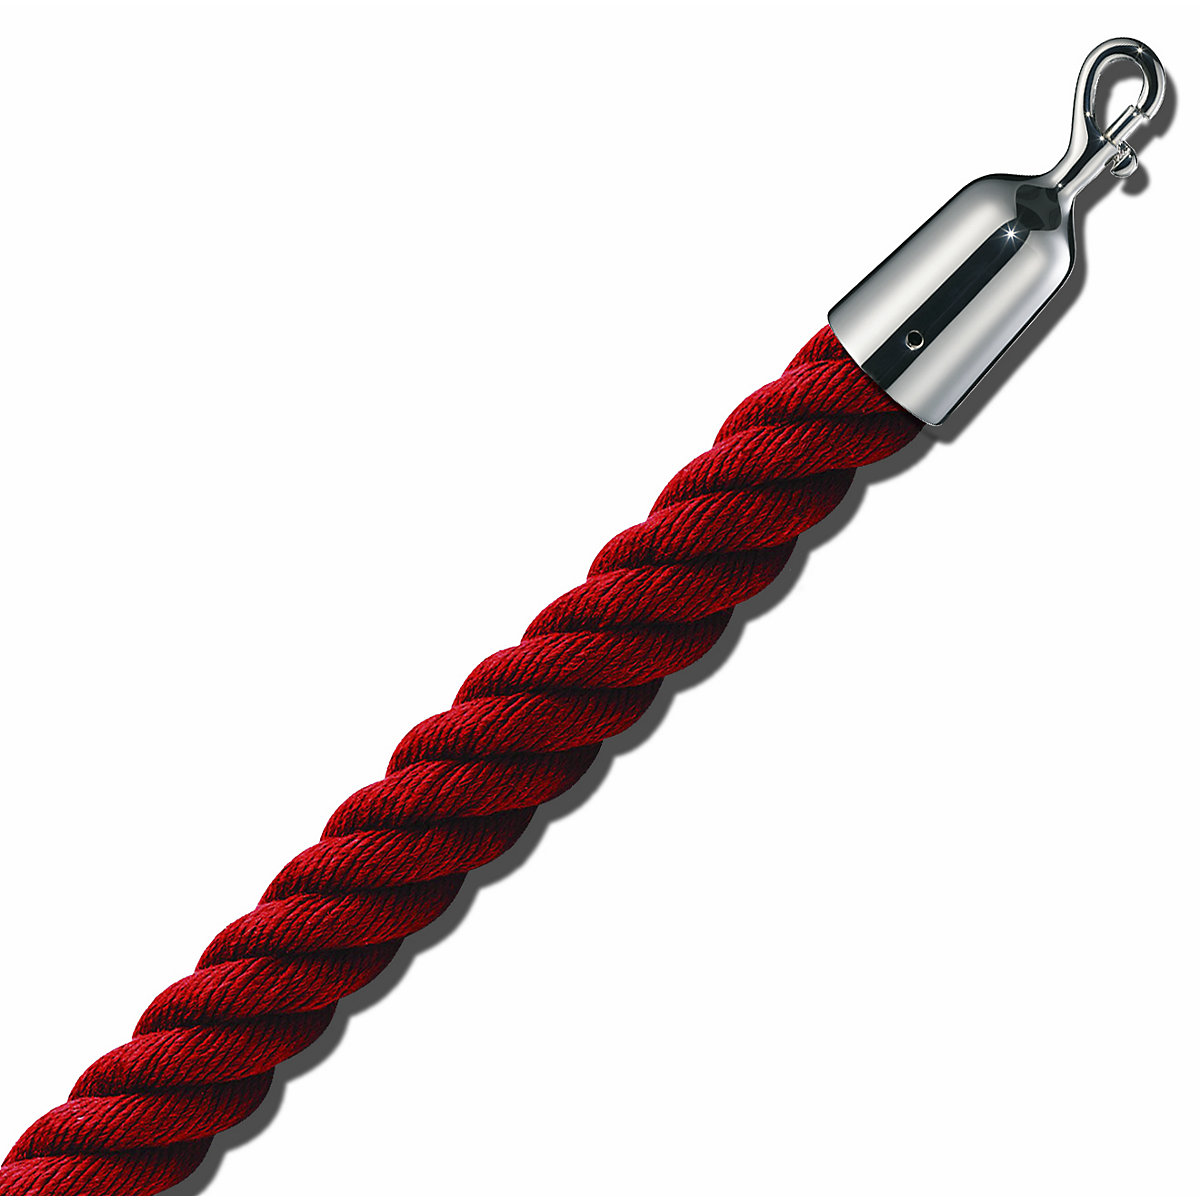 Barrier cord 1.5 m, chrome end caps, red cord-6